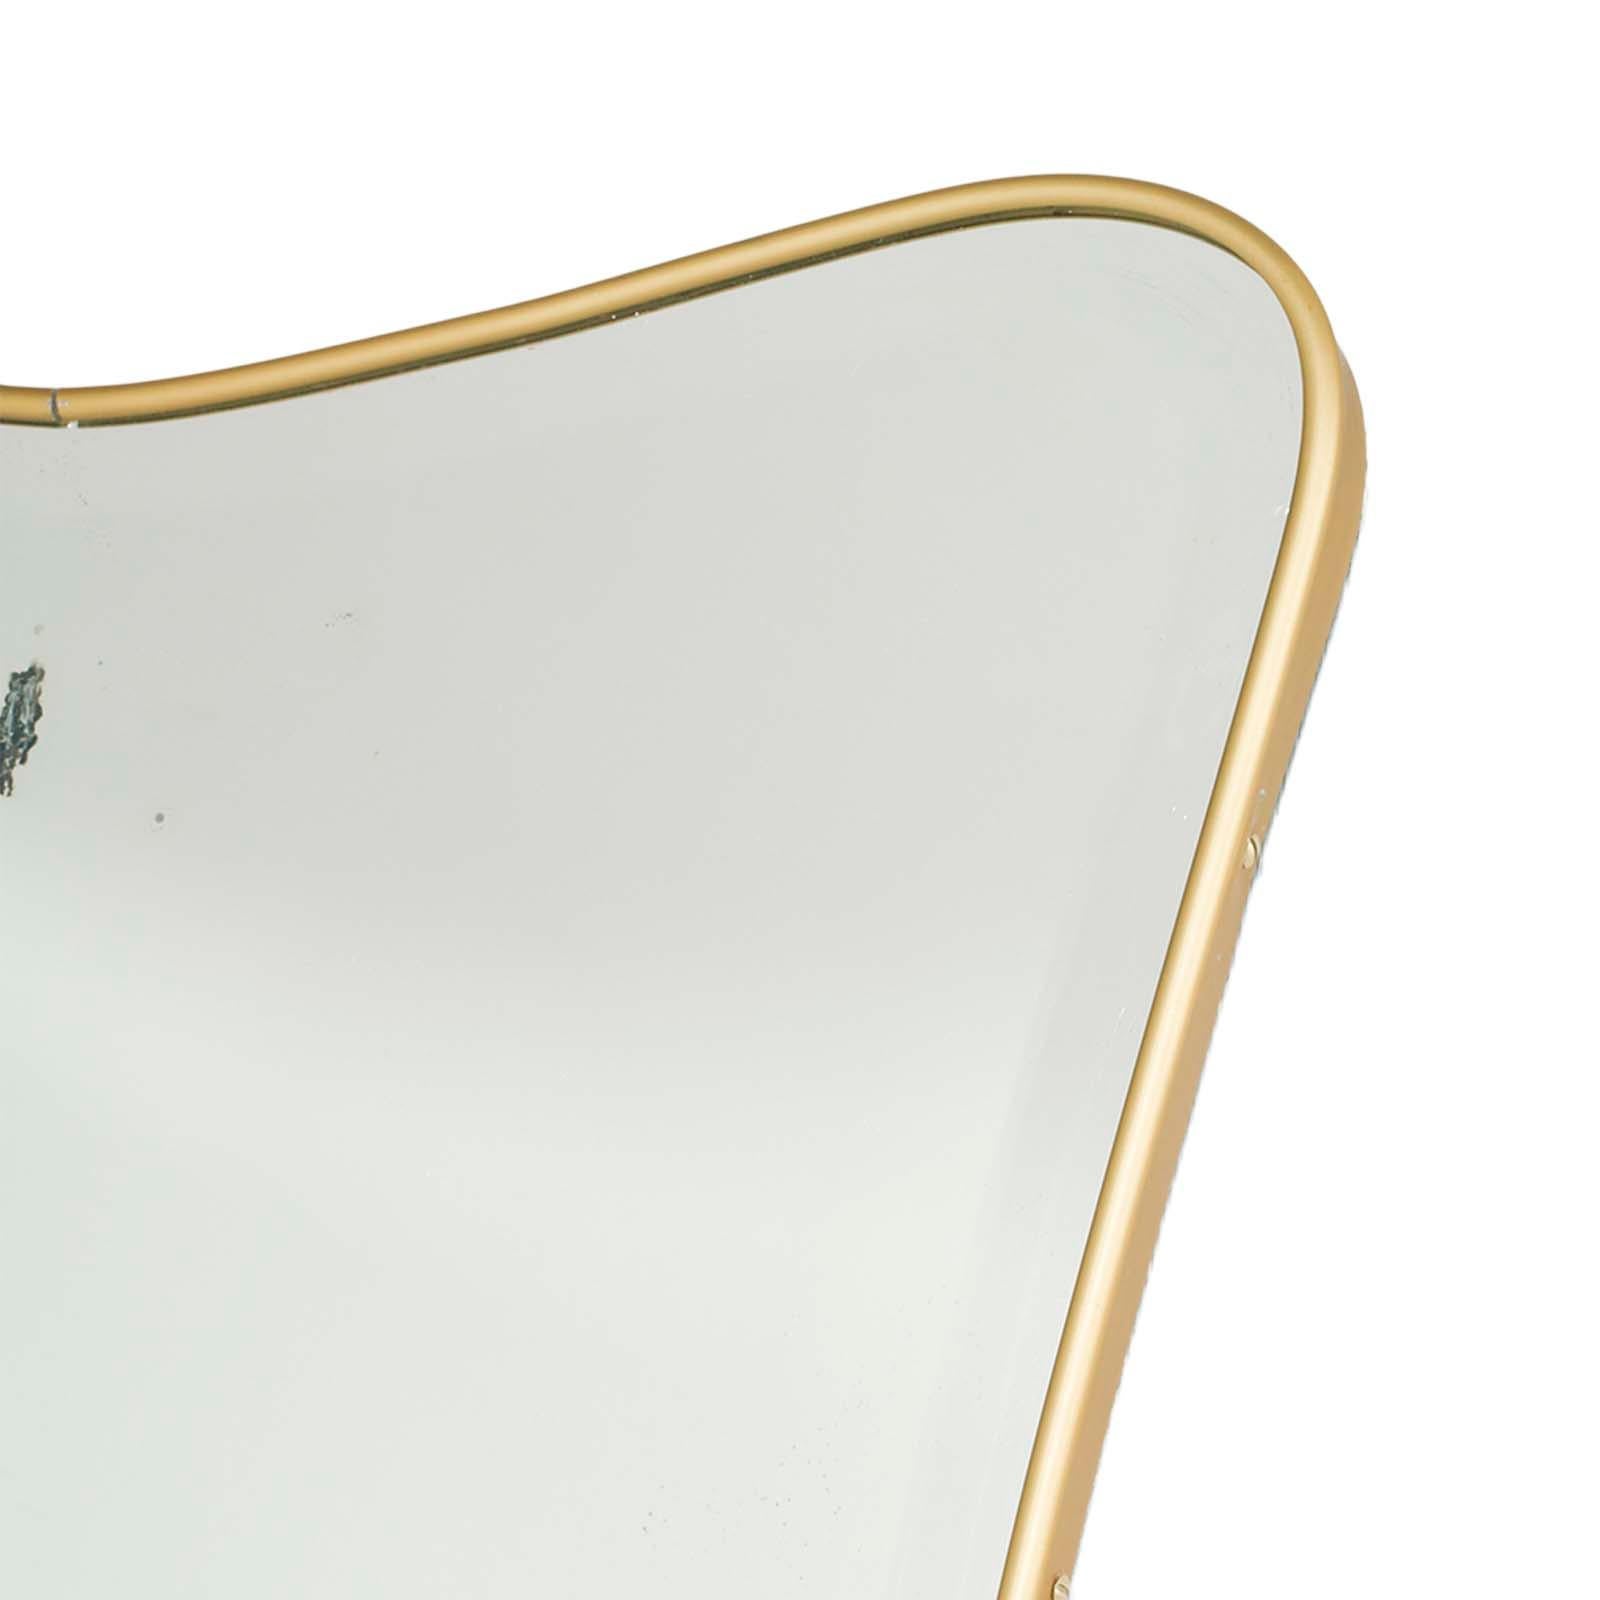 Classic mirror Gio Ponti attributed, produced by Fontana Arte from the 1940s, with bevelled mirror and gilt metal frame.

The mirror has an imperfection in the silvering produced by the rear attachment hook; but this does not disfigure the beauty